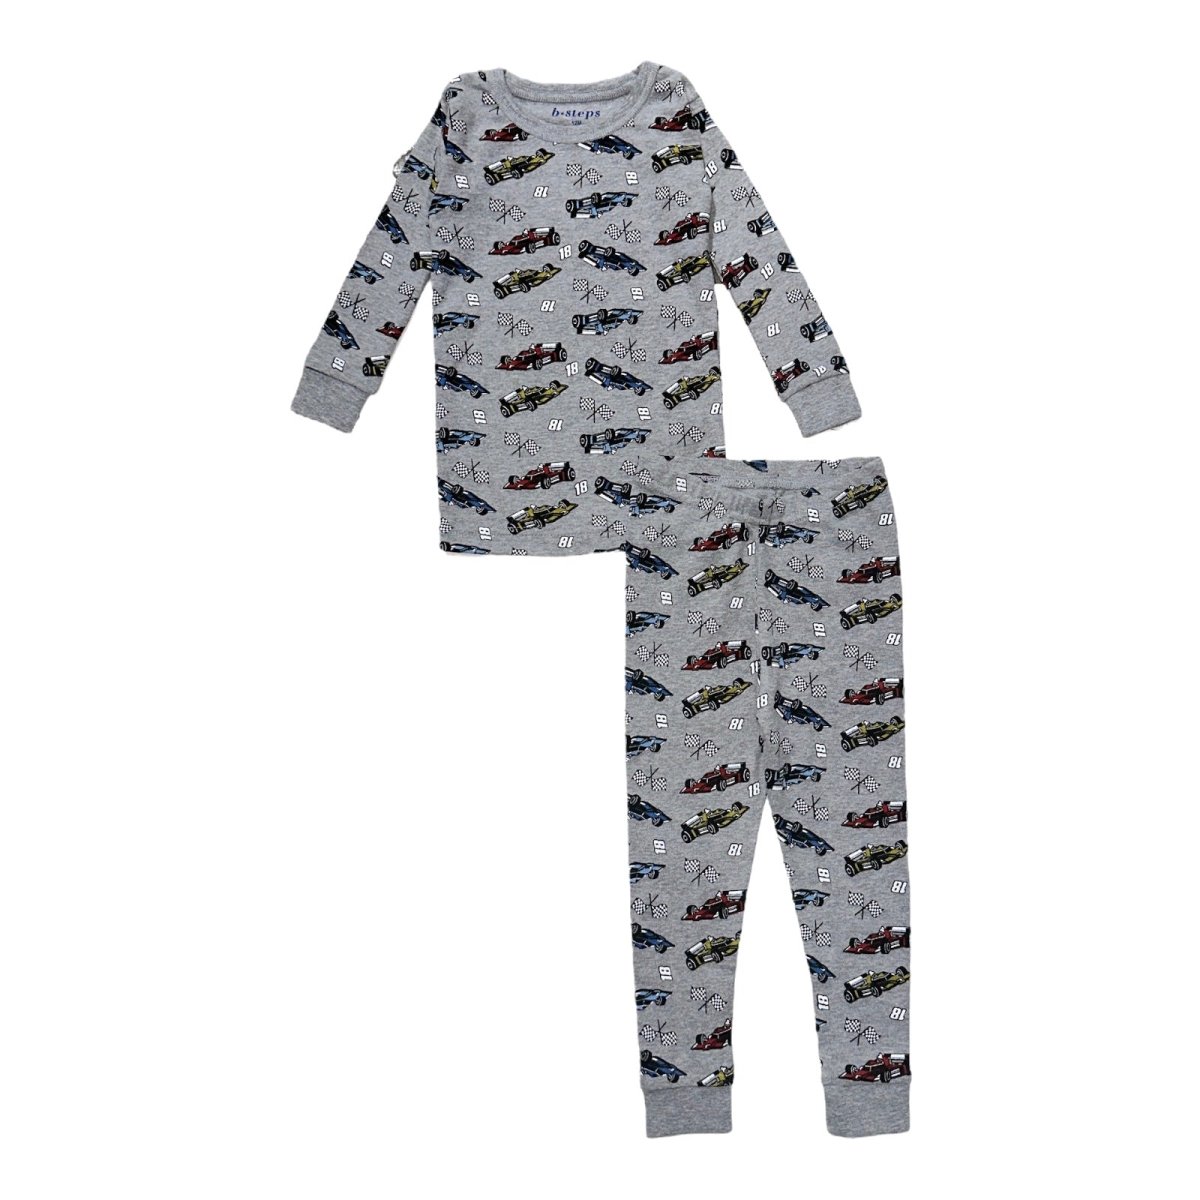 RACE CARS TWO PIECE PJS - BABY STEPS